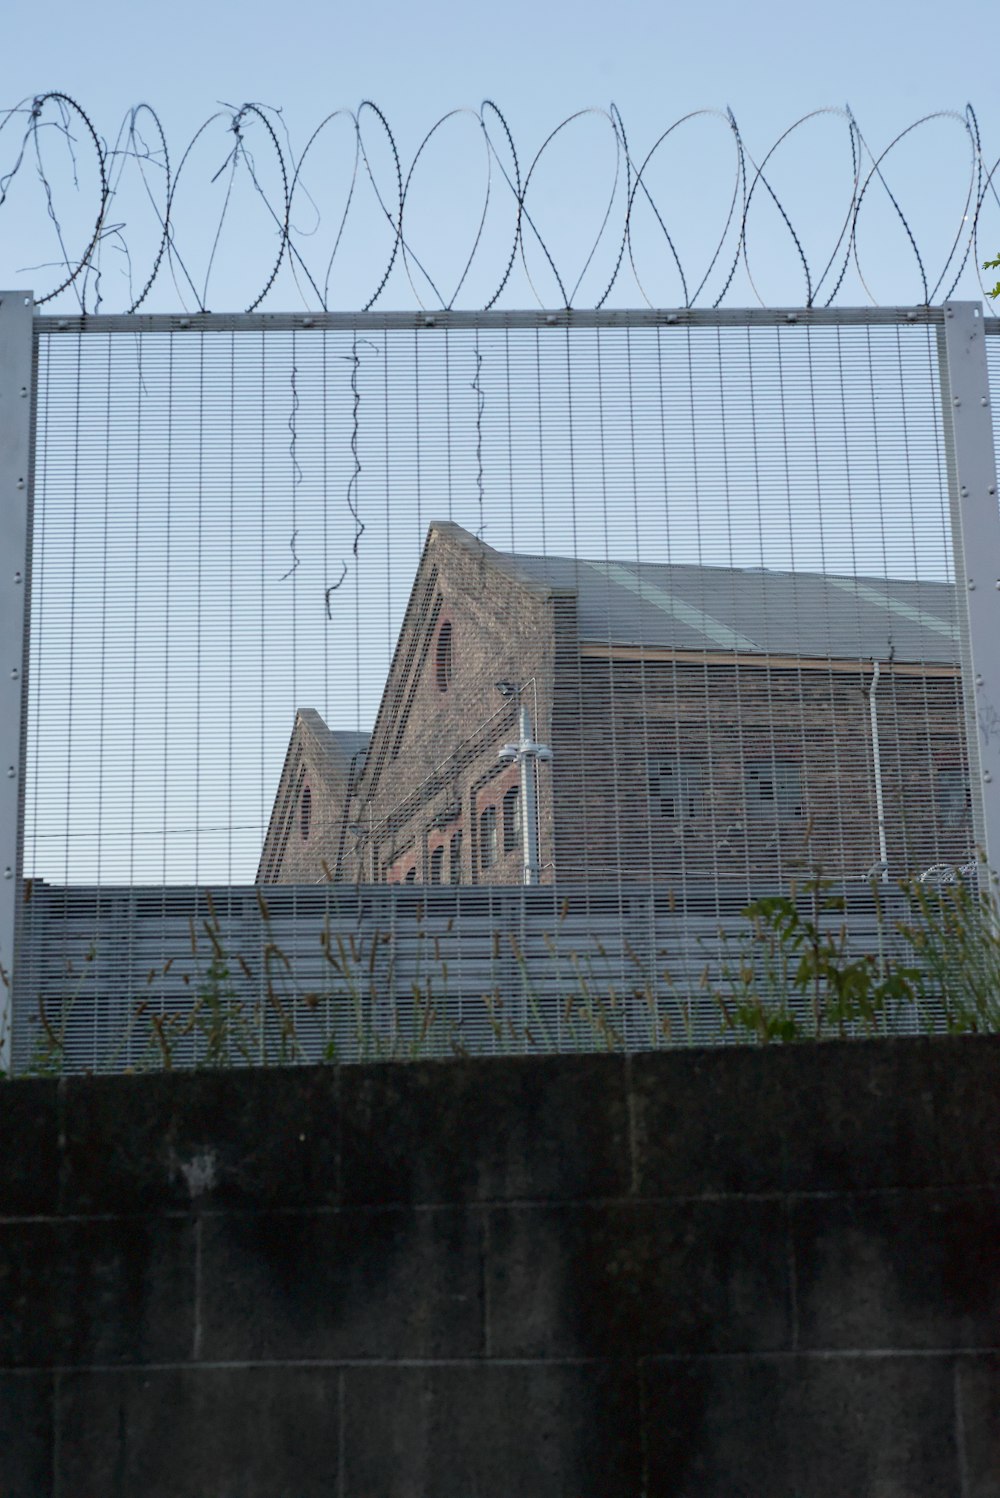 a fenced in area with a building in the background